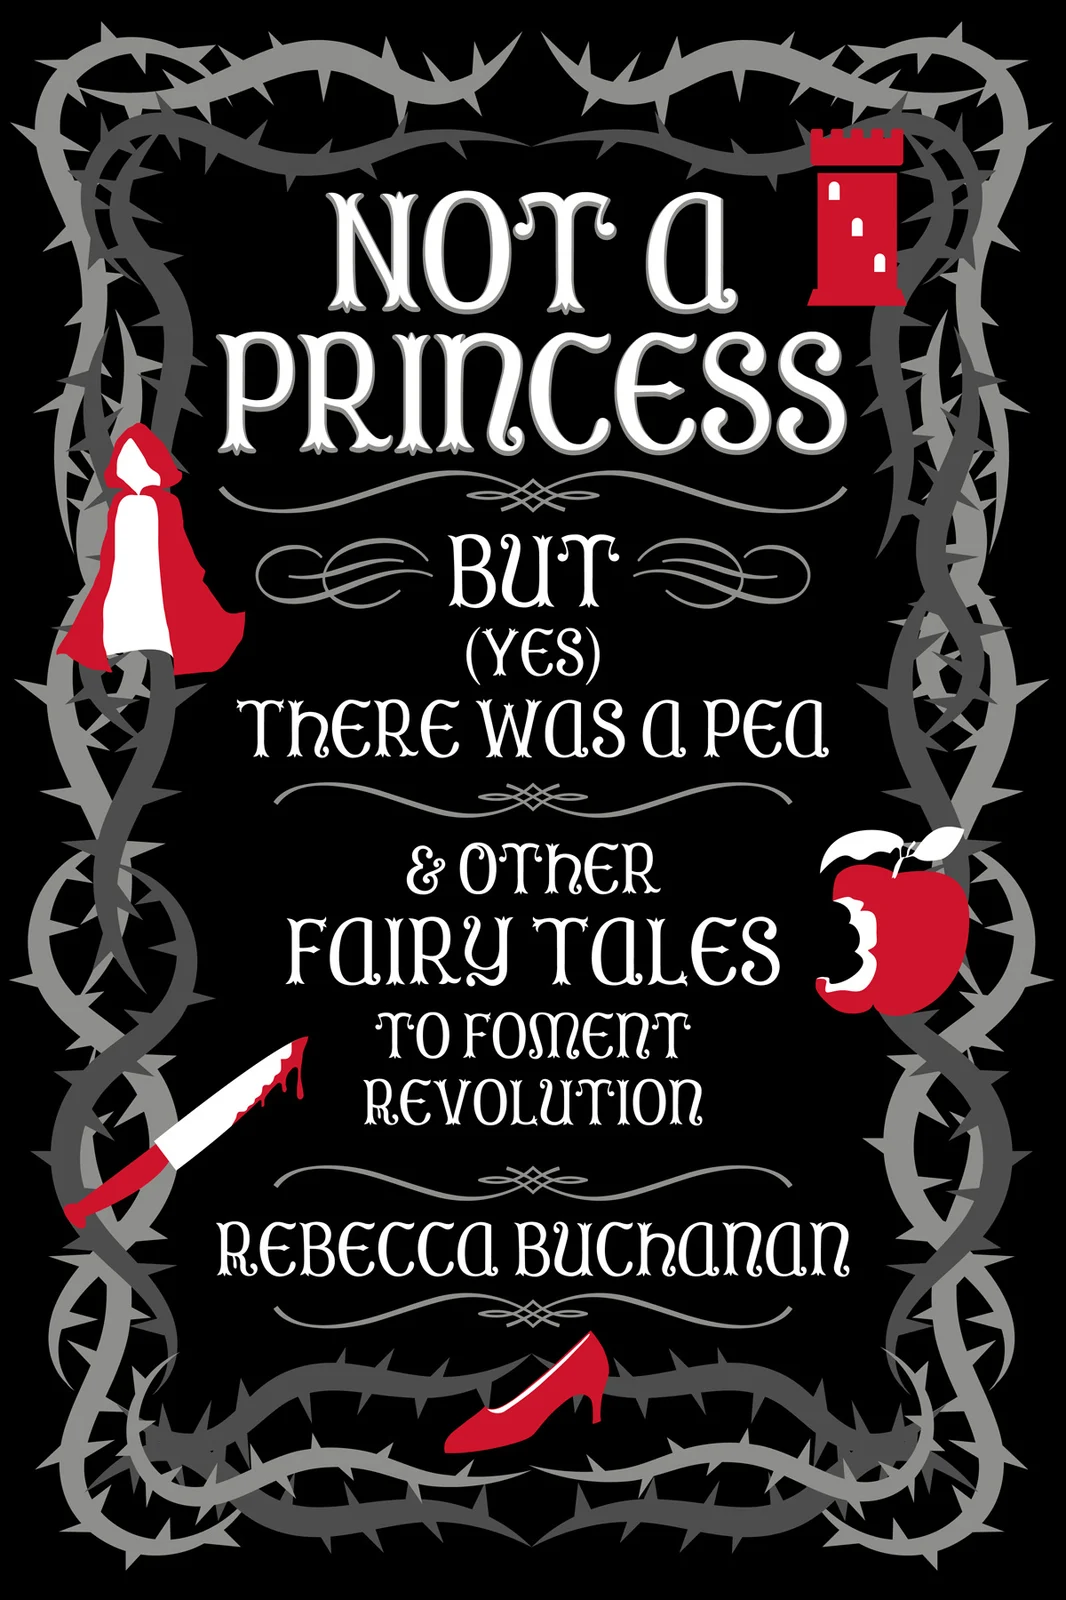 Not a Princess cover